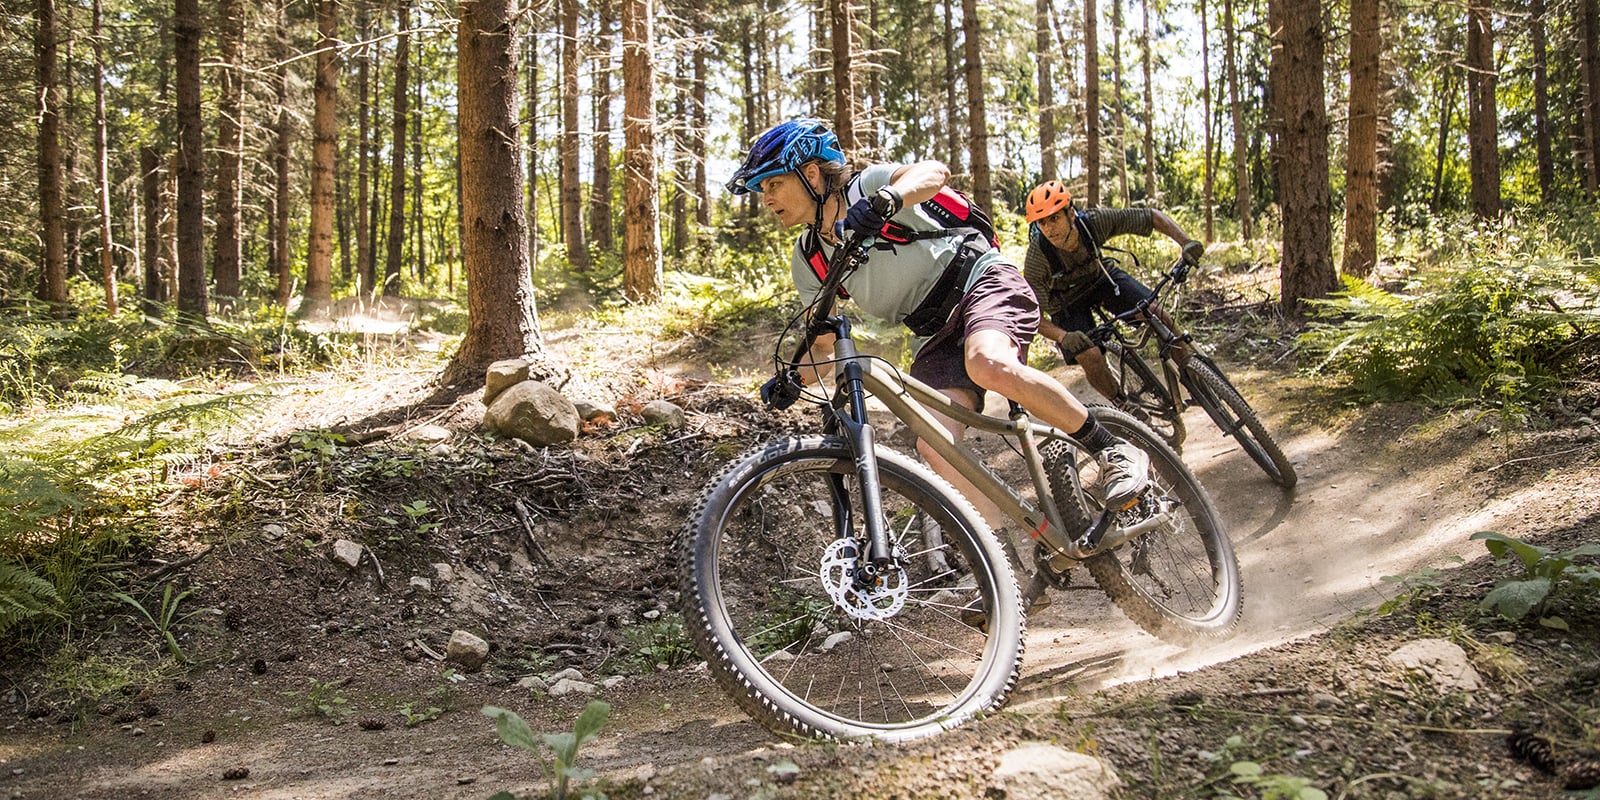 Two mountain bikers take sharp corner on off-road forest trail on sunny day